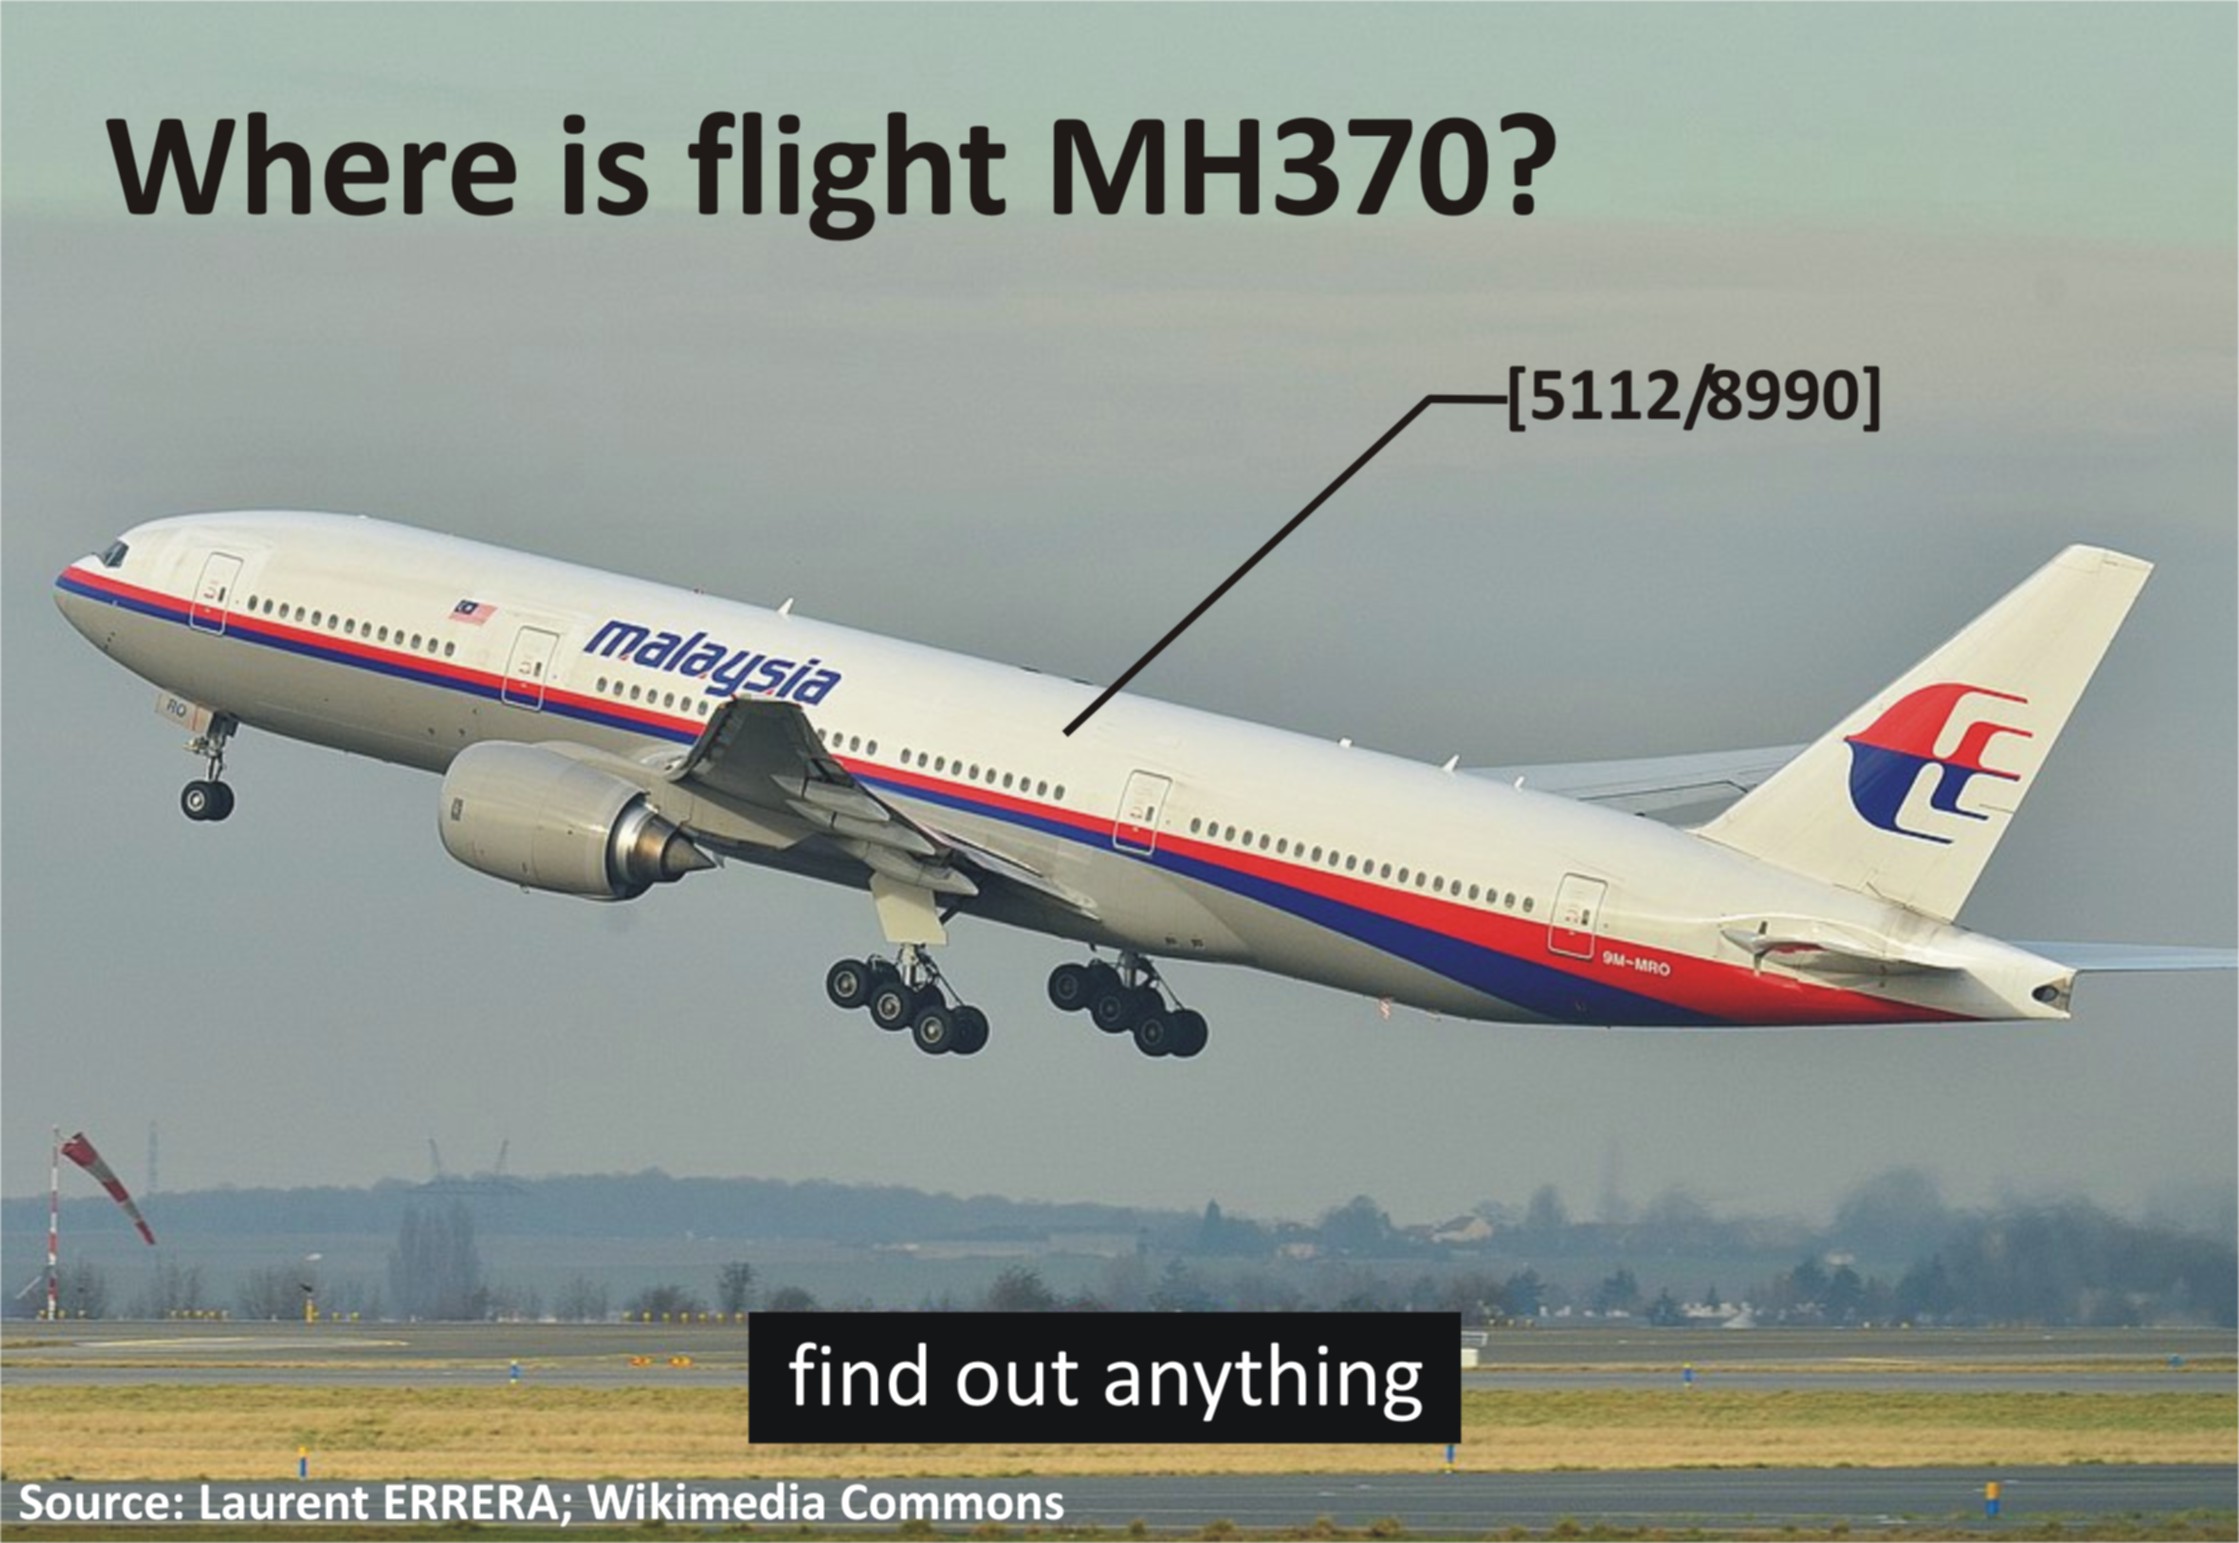 Where is flight MH370?